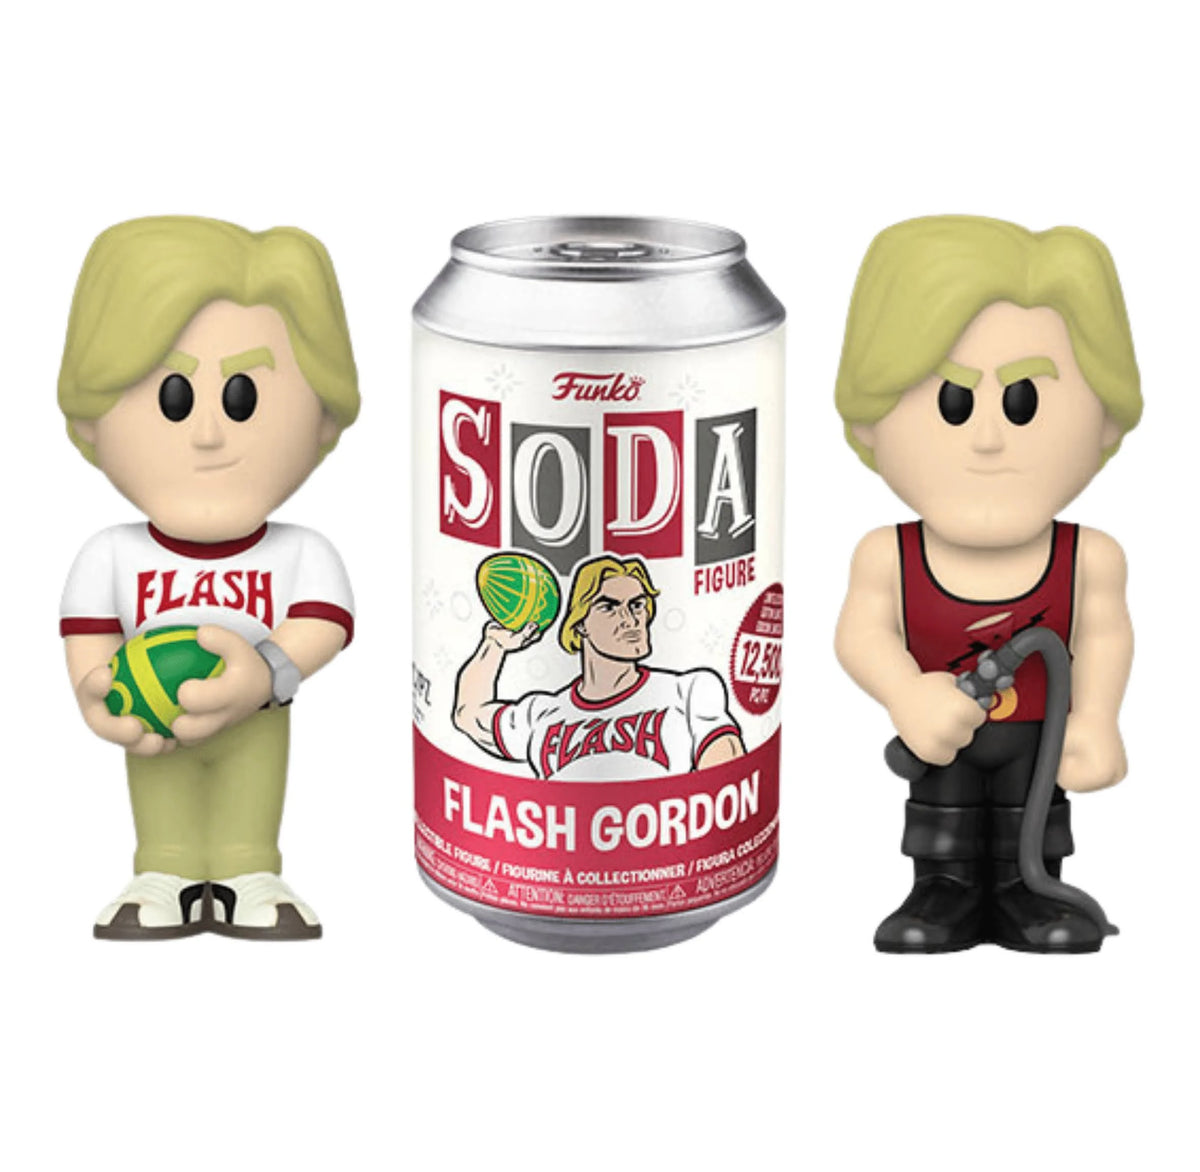 Flash Gordon Vinyl Soda Flash Limited Edition Figure with Chance of Chase